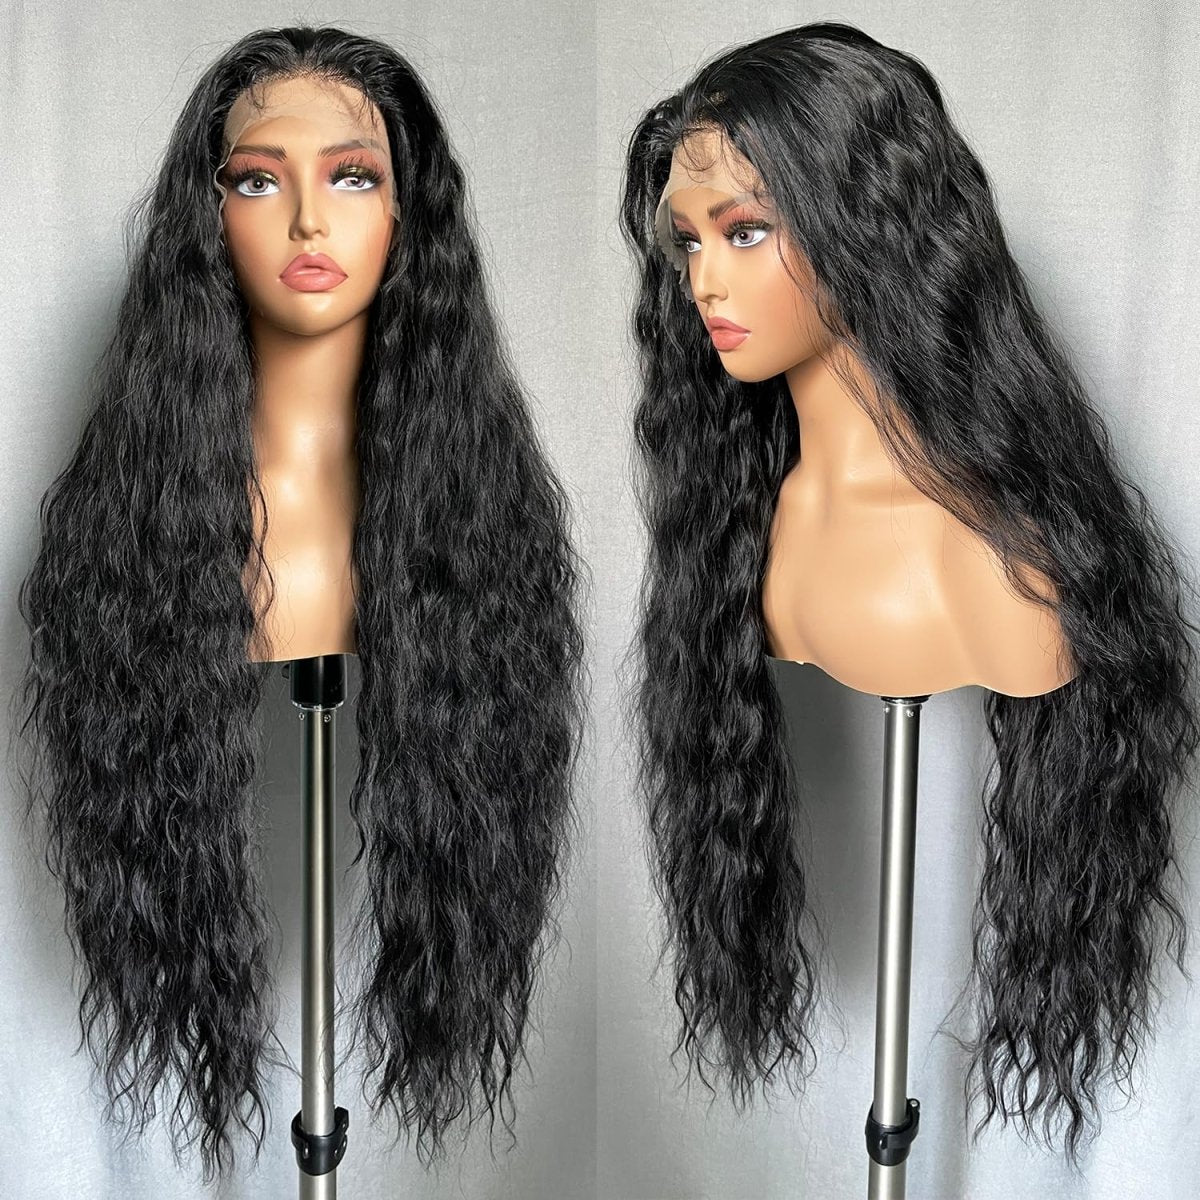 13x4 Lace Front Synthetic Hair Wig 32 Inch - Hair Plus ME